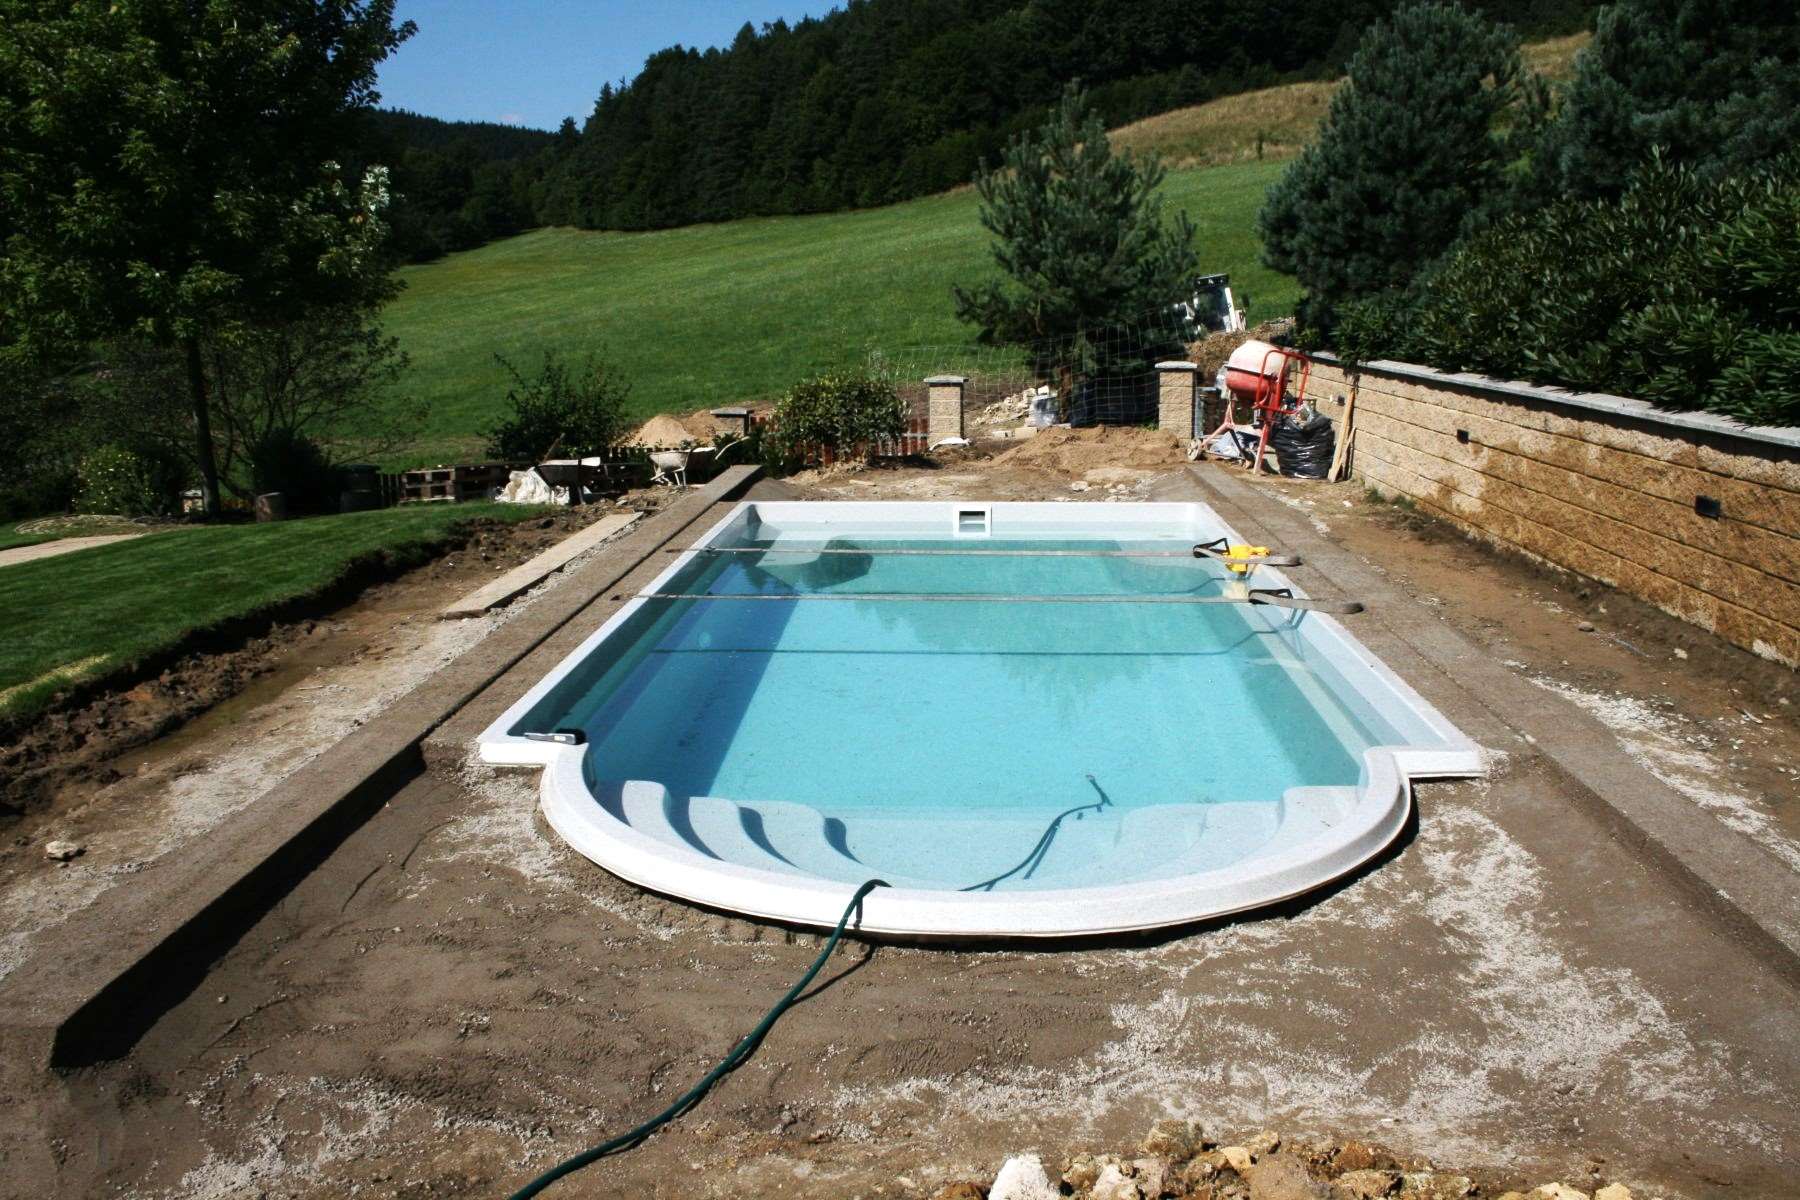 How To Build My Own Swimming Pool